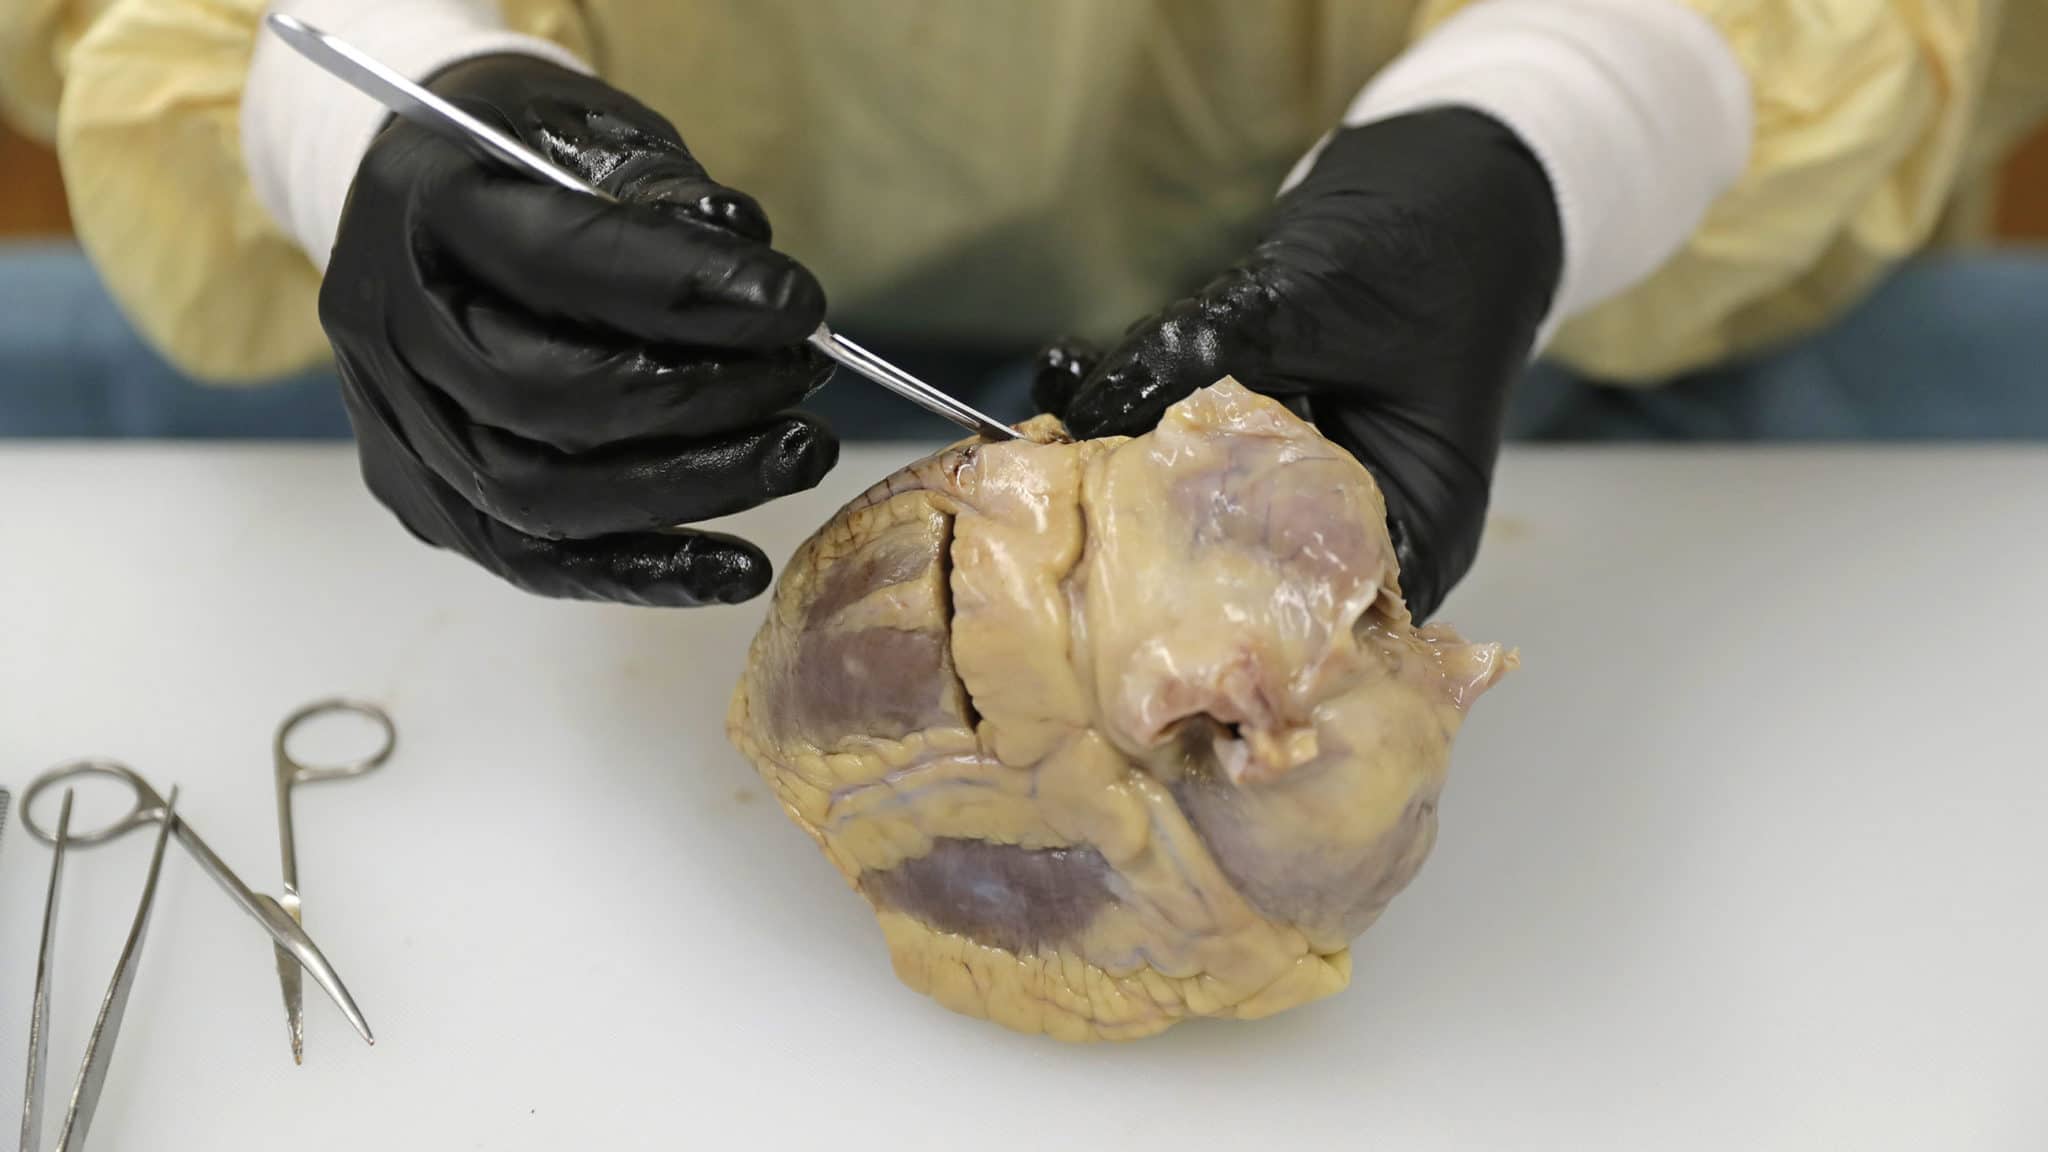 Dr. Desiree Marshall, director of Autopsy and After Death Services for University of Washington Medicine, examines the preserved heart of a person who died of Covid-19-related complications.